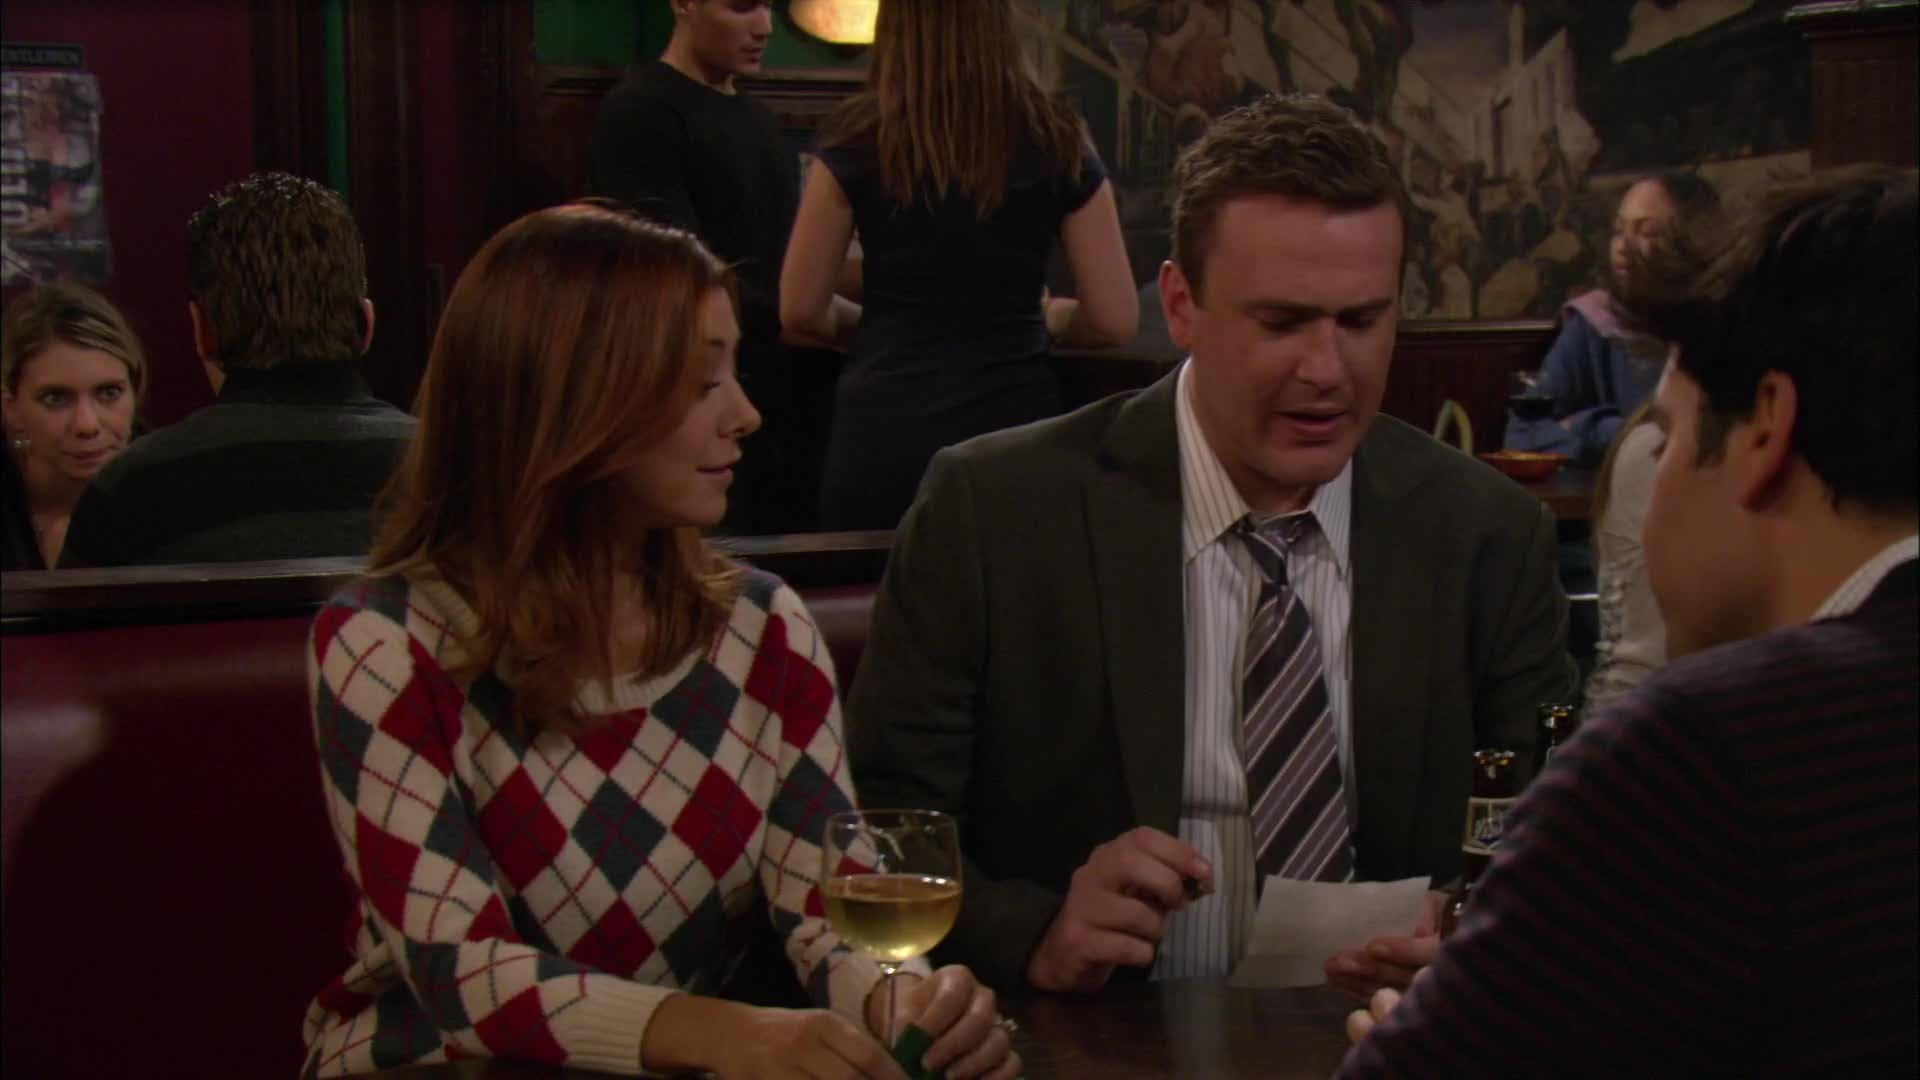 Image How I Met Your Mother 1